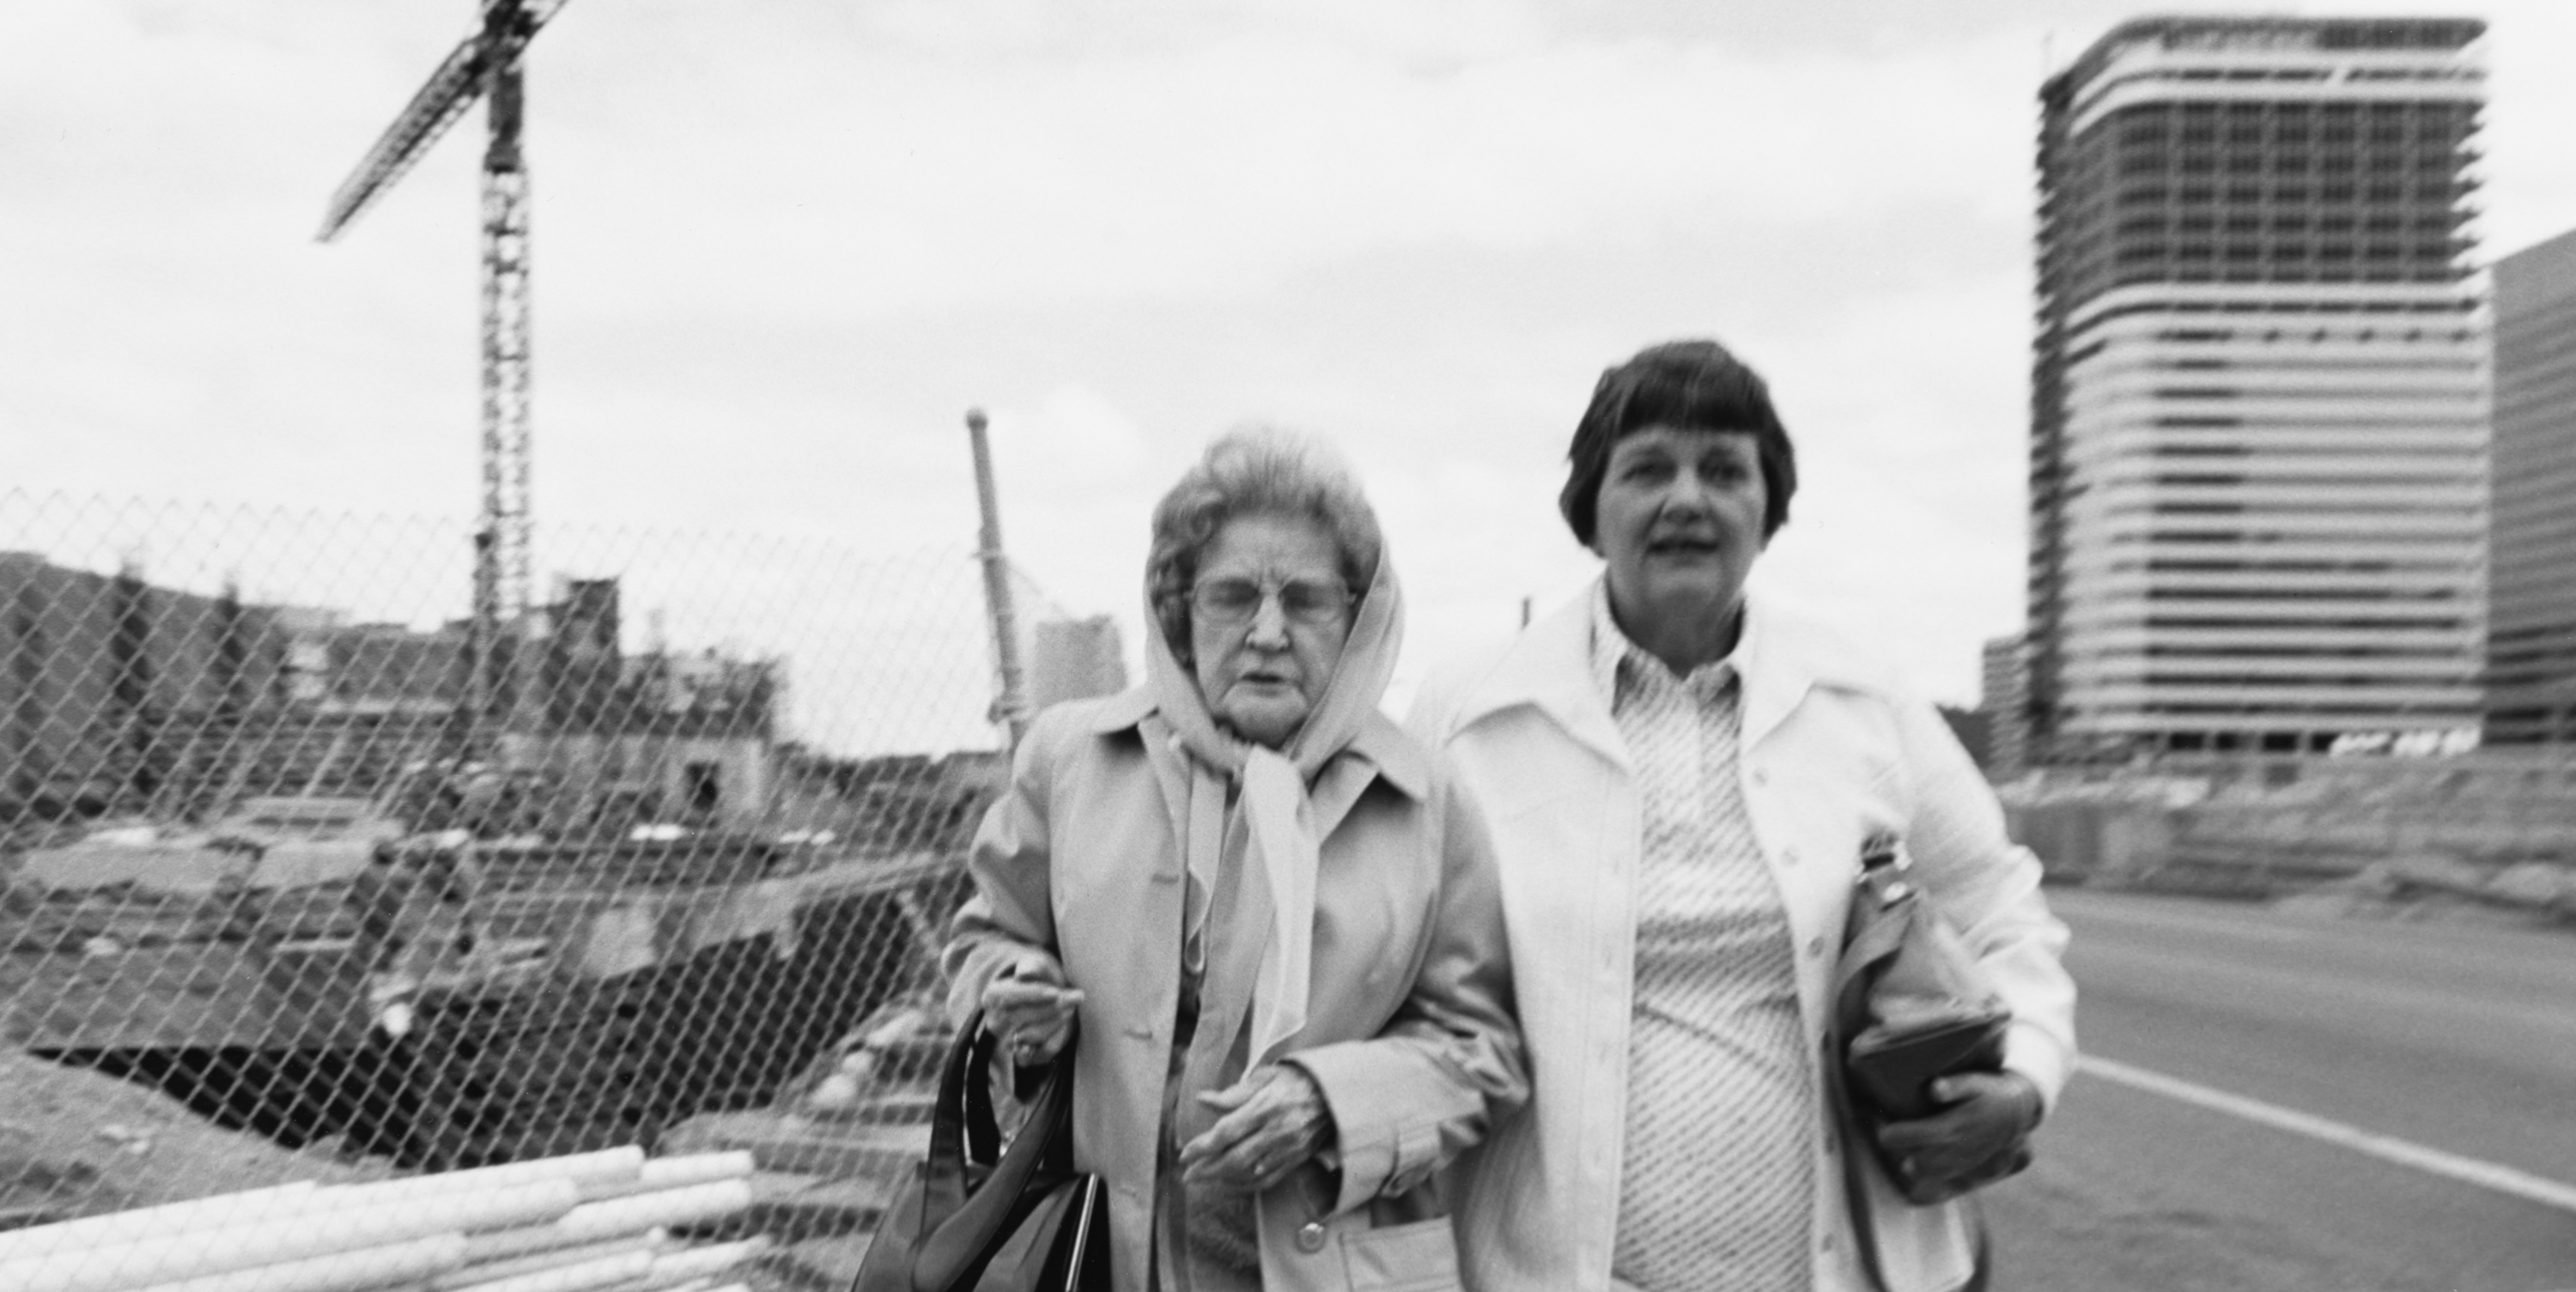 Black and white photograph of two female figures walking side by side outside amongst construction